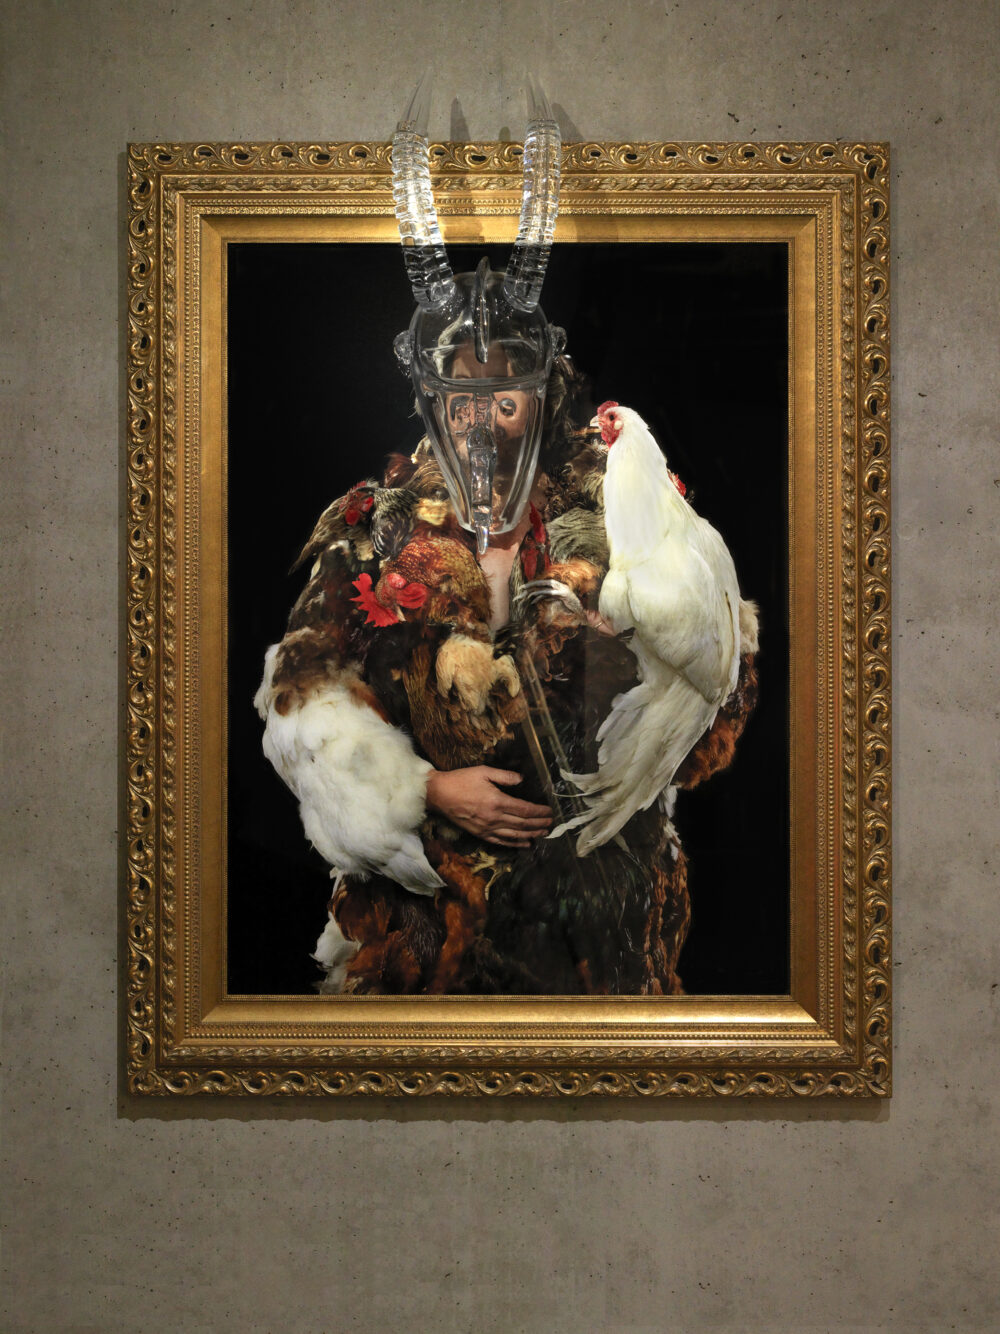 A painting of a man wearing a coat made of chicken feathers holds a white chicken in one hand. An antelope head made out of glass is placed on top of the subject's face atop the canvas. The piece is surrounded by a gold, gilded frame.